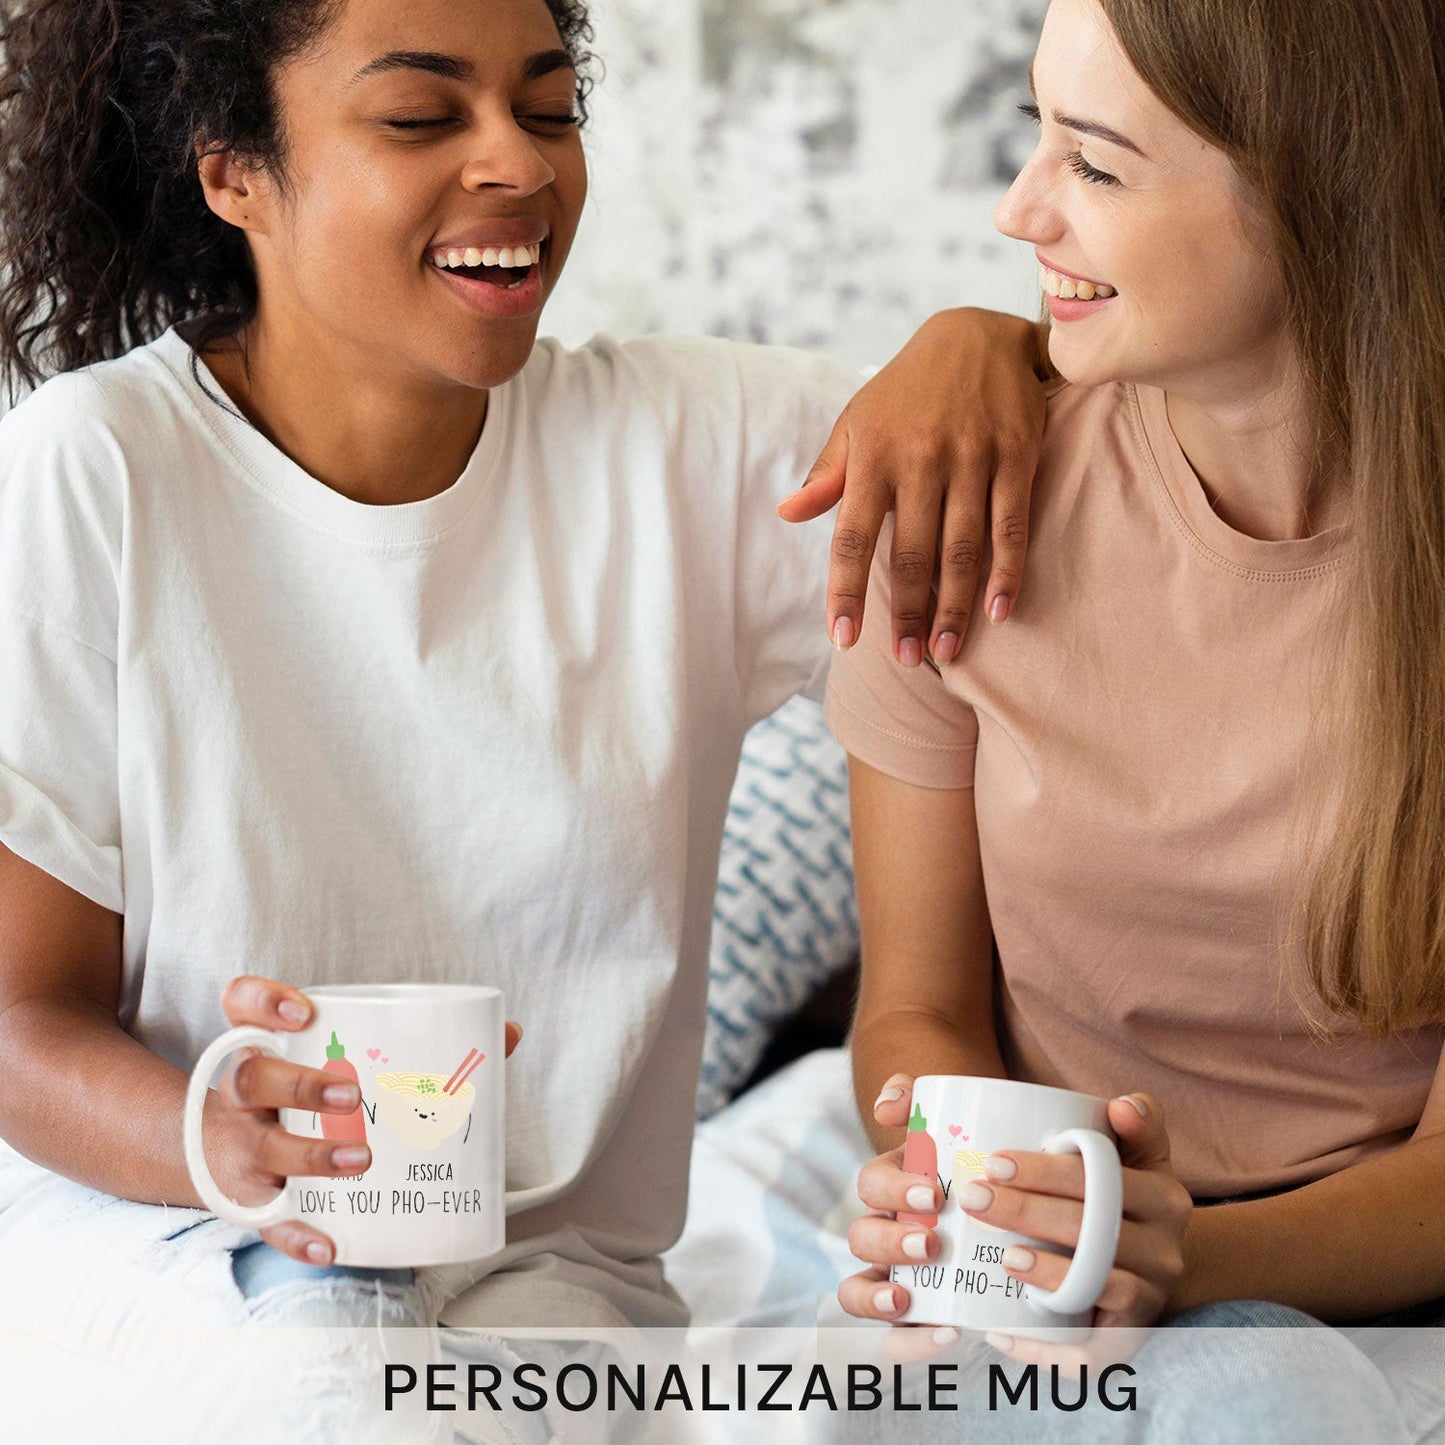 I  Love You Pho-ever - Personalized Anniversary, Valentine's Day gift for couple - Custom Mug - MyMindfulGifts